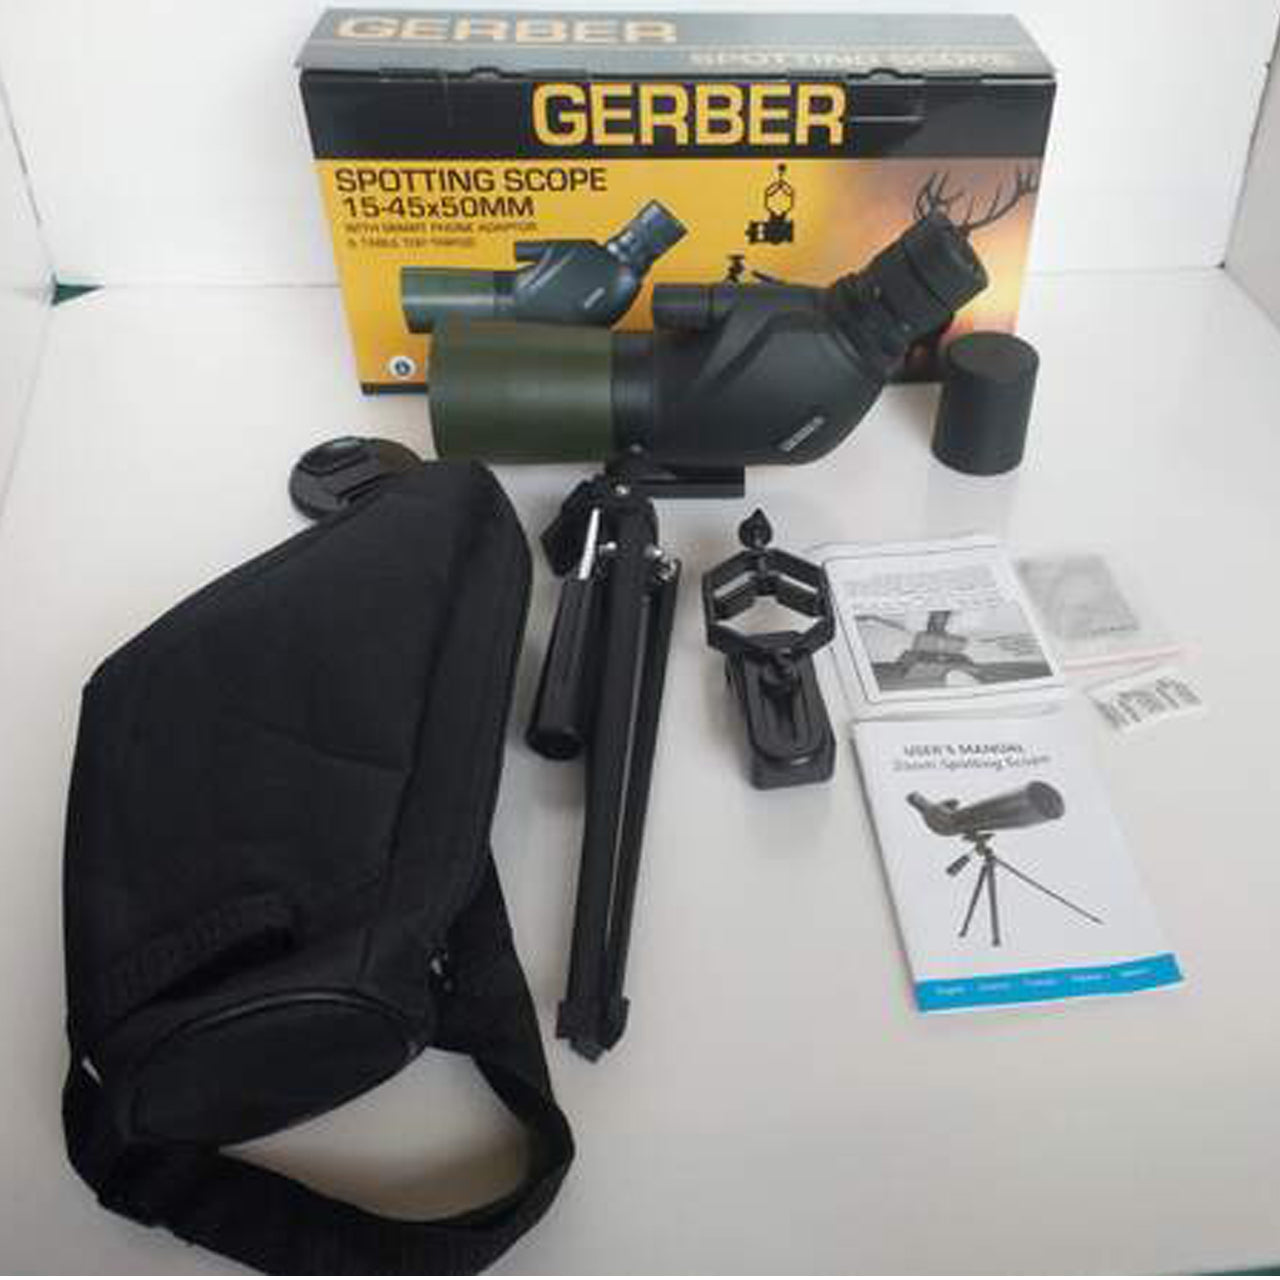 The GERBER 15-45x50mm is one of the most unique spotting scopes in the market. Economical and compact, it offers high magnifications in a 45 degree eyepiece&nbsp;design. The rubber armoured exterior is both, attractive and durable. www.defenceqstore.com.au